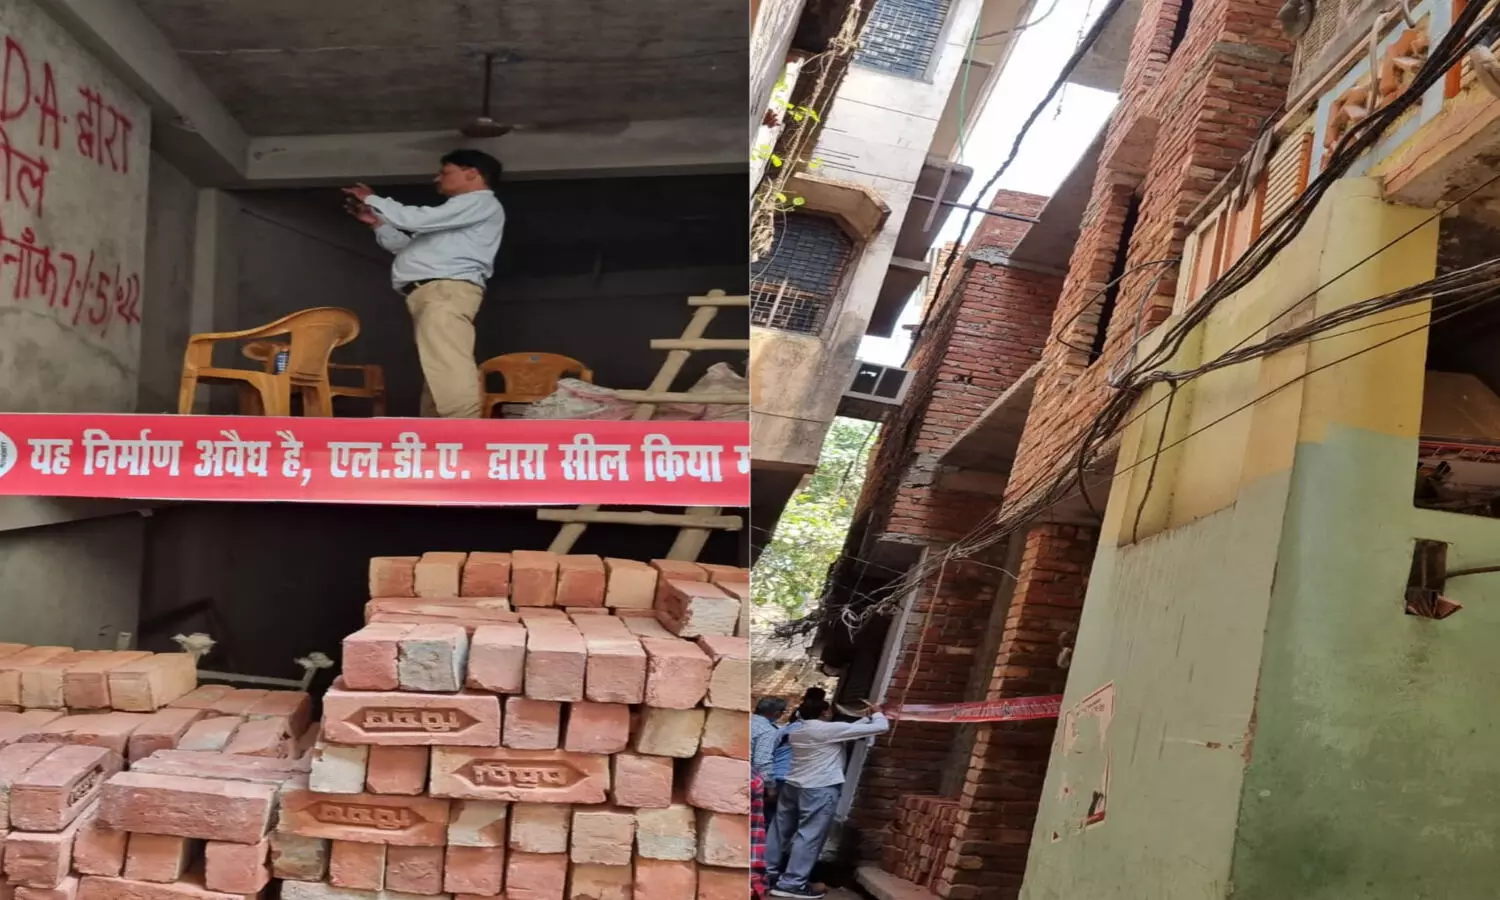 Lucknow: Rapid action on illegal construction, LDA sealed the house being built in the chowk